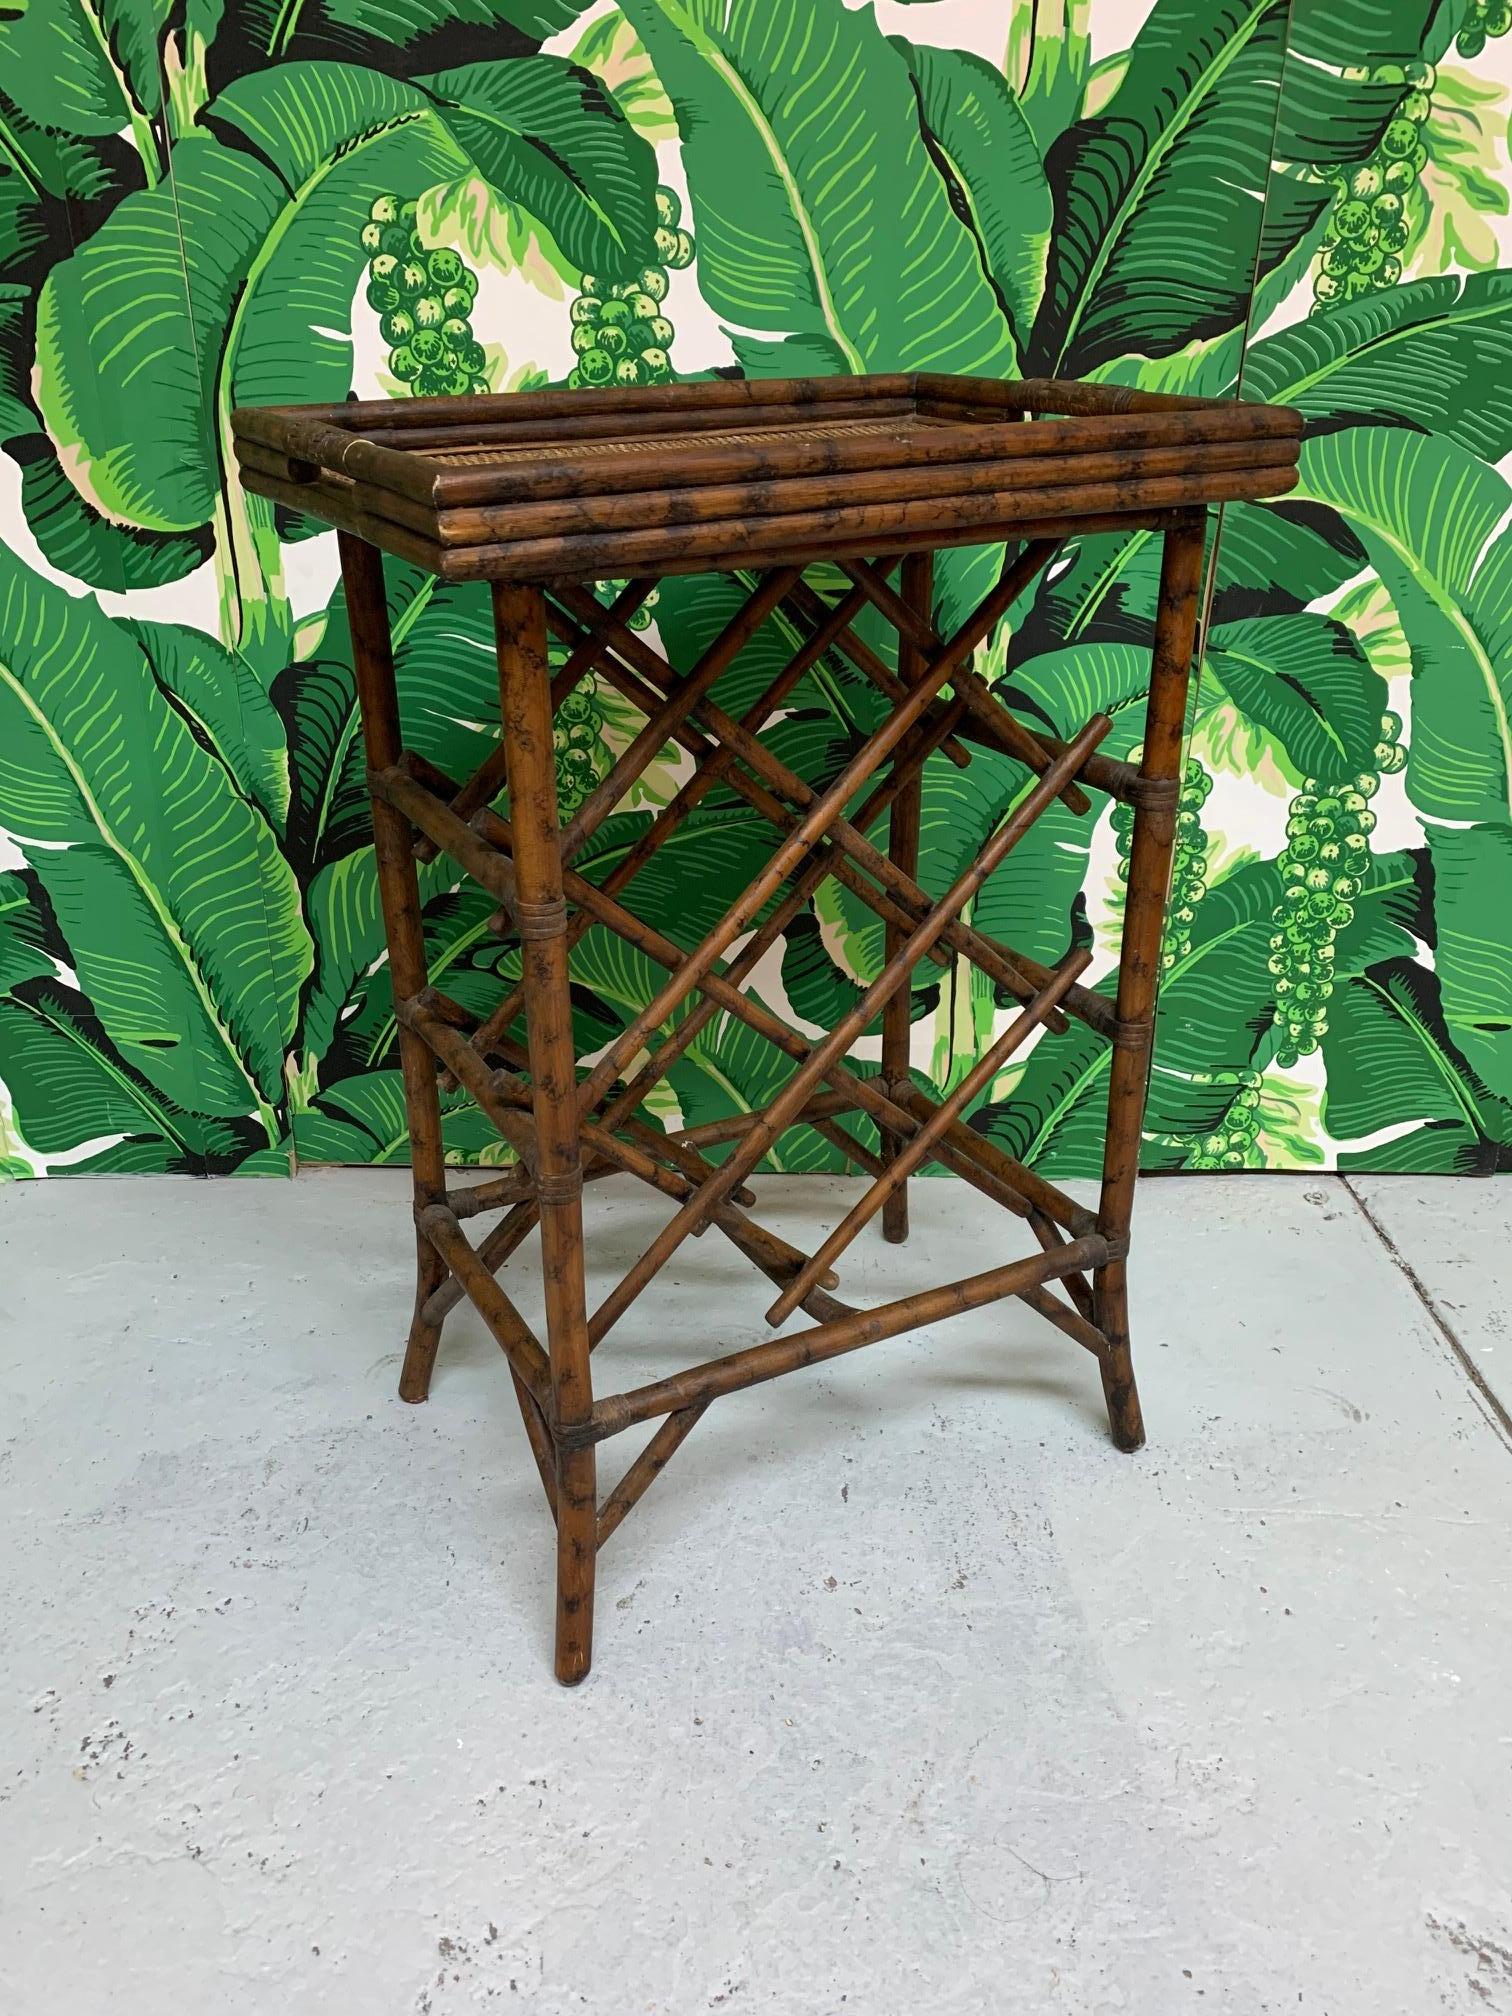 Vintage rattan wine rack doubles as a table with removable serving tray. Holds 7 bottles, and more libations can be displayed on the top tray. Very good vintage condition with age appropriate patina.